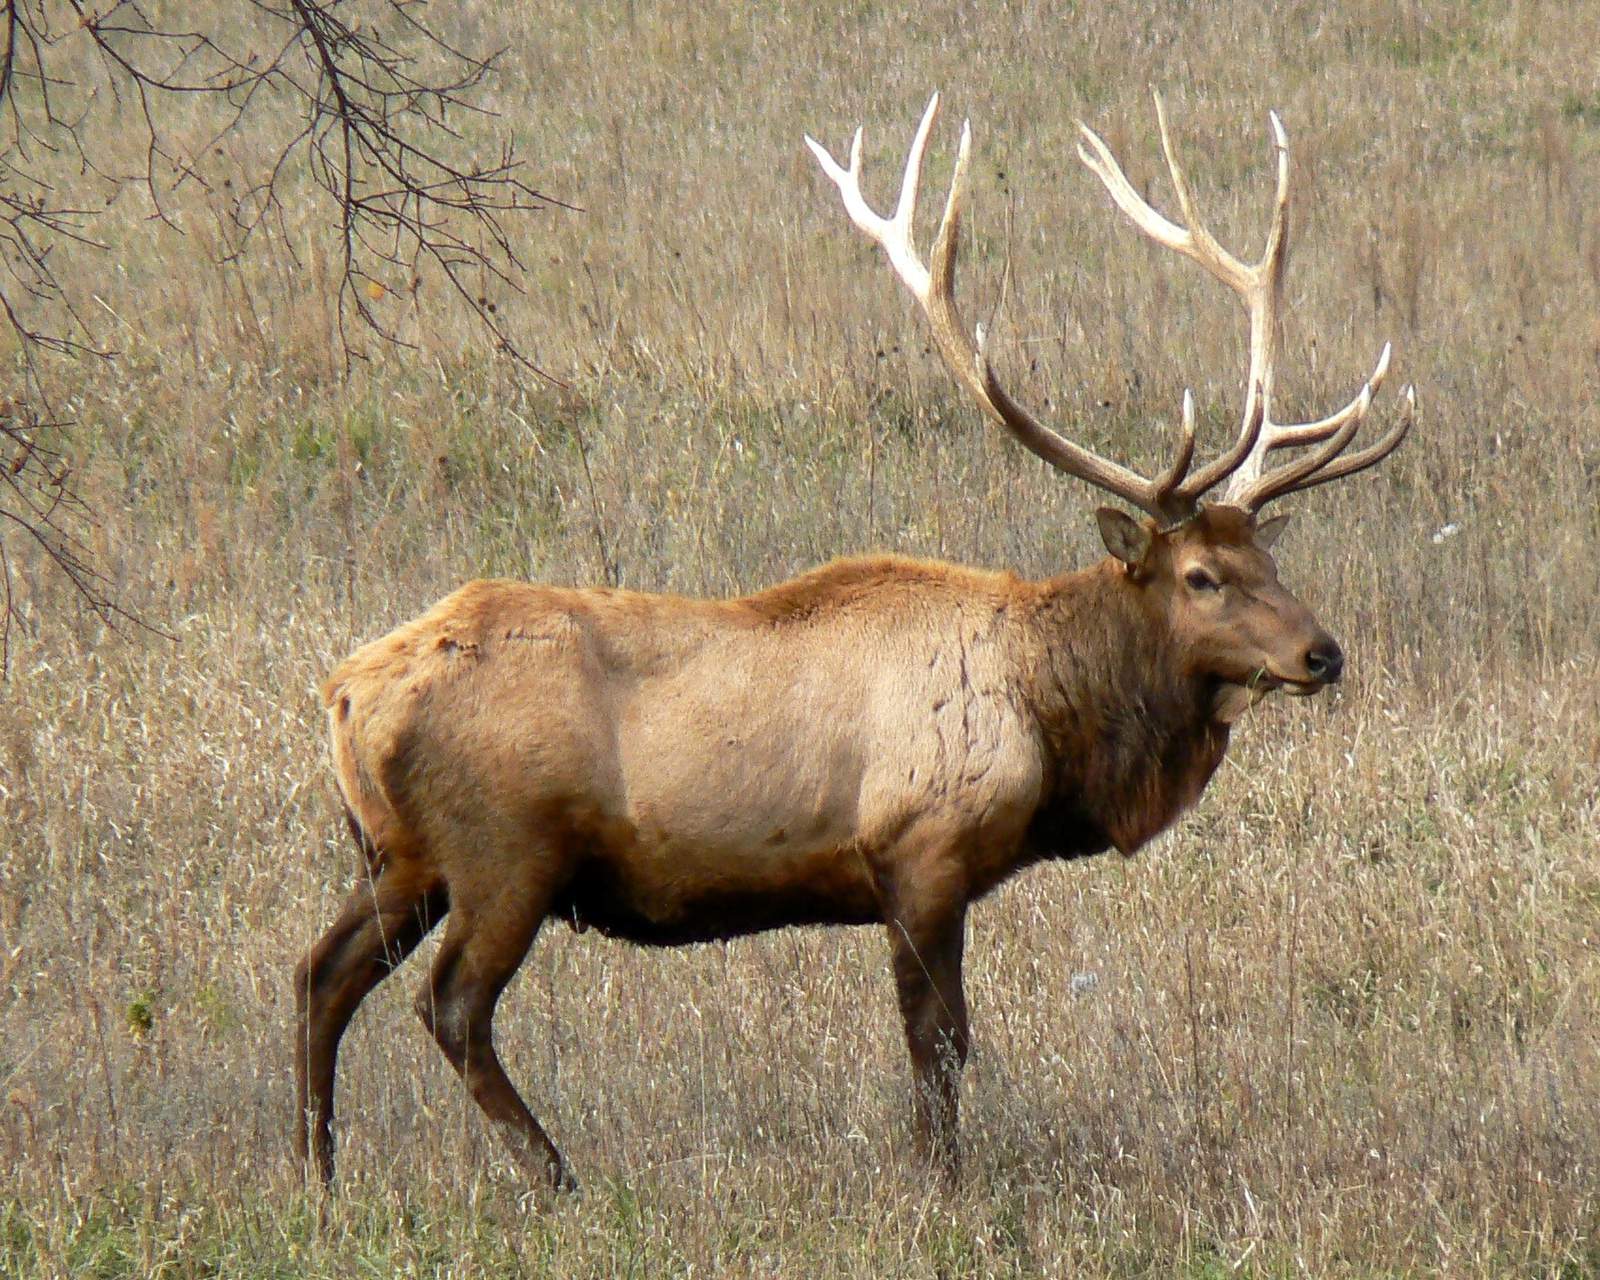 Man faces charges after elk poached in Michigan forest